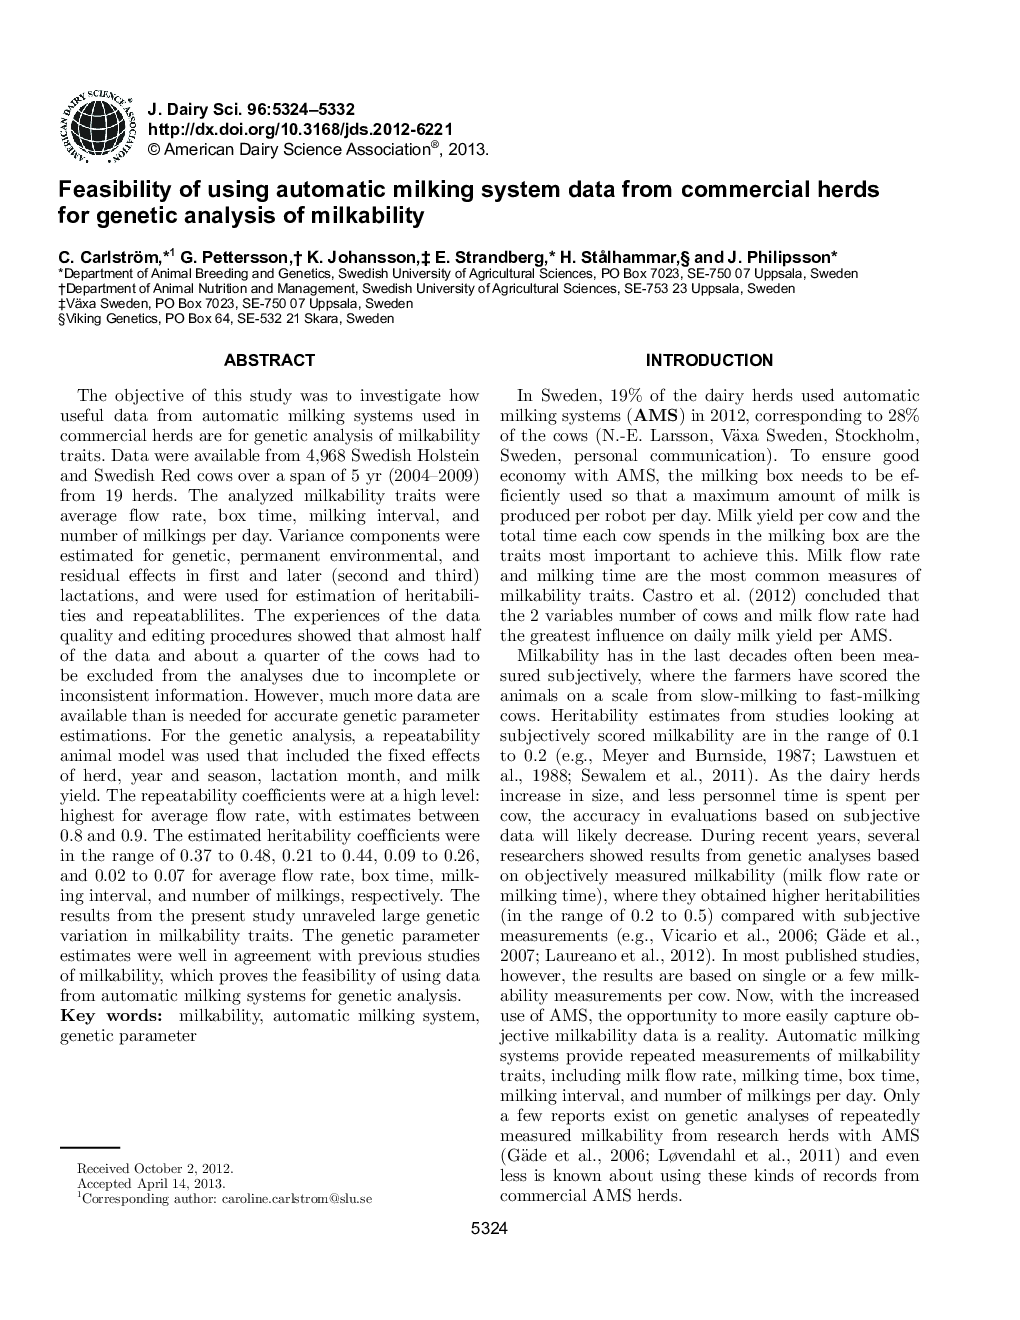 Feasibility of using automatic milking system data from commercial herds for genetic analysis of milkability